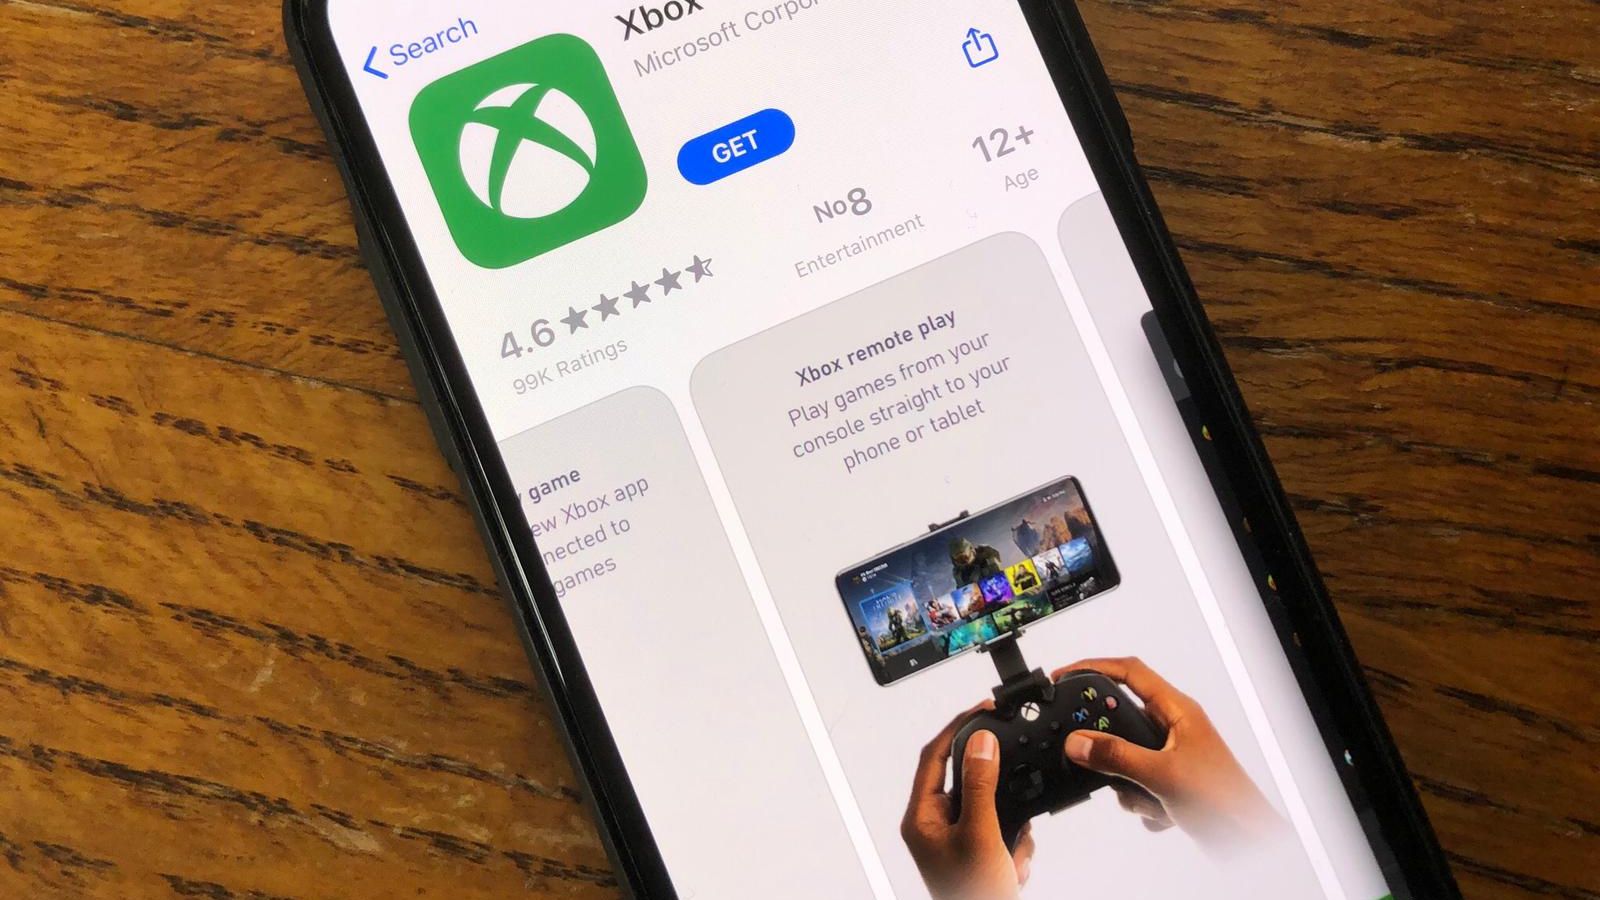 Microsoft updates app to enable iPhone and iPad users to play Xbox games